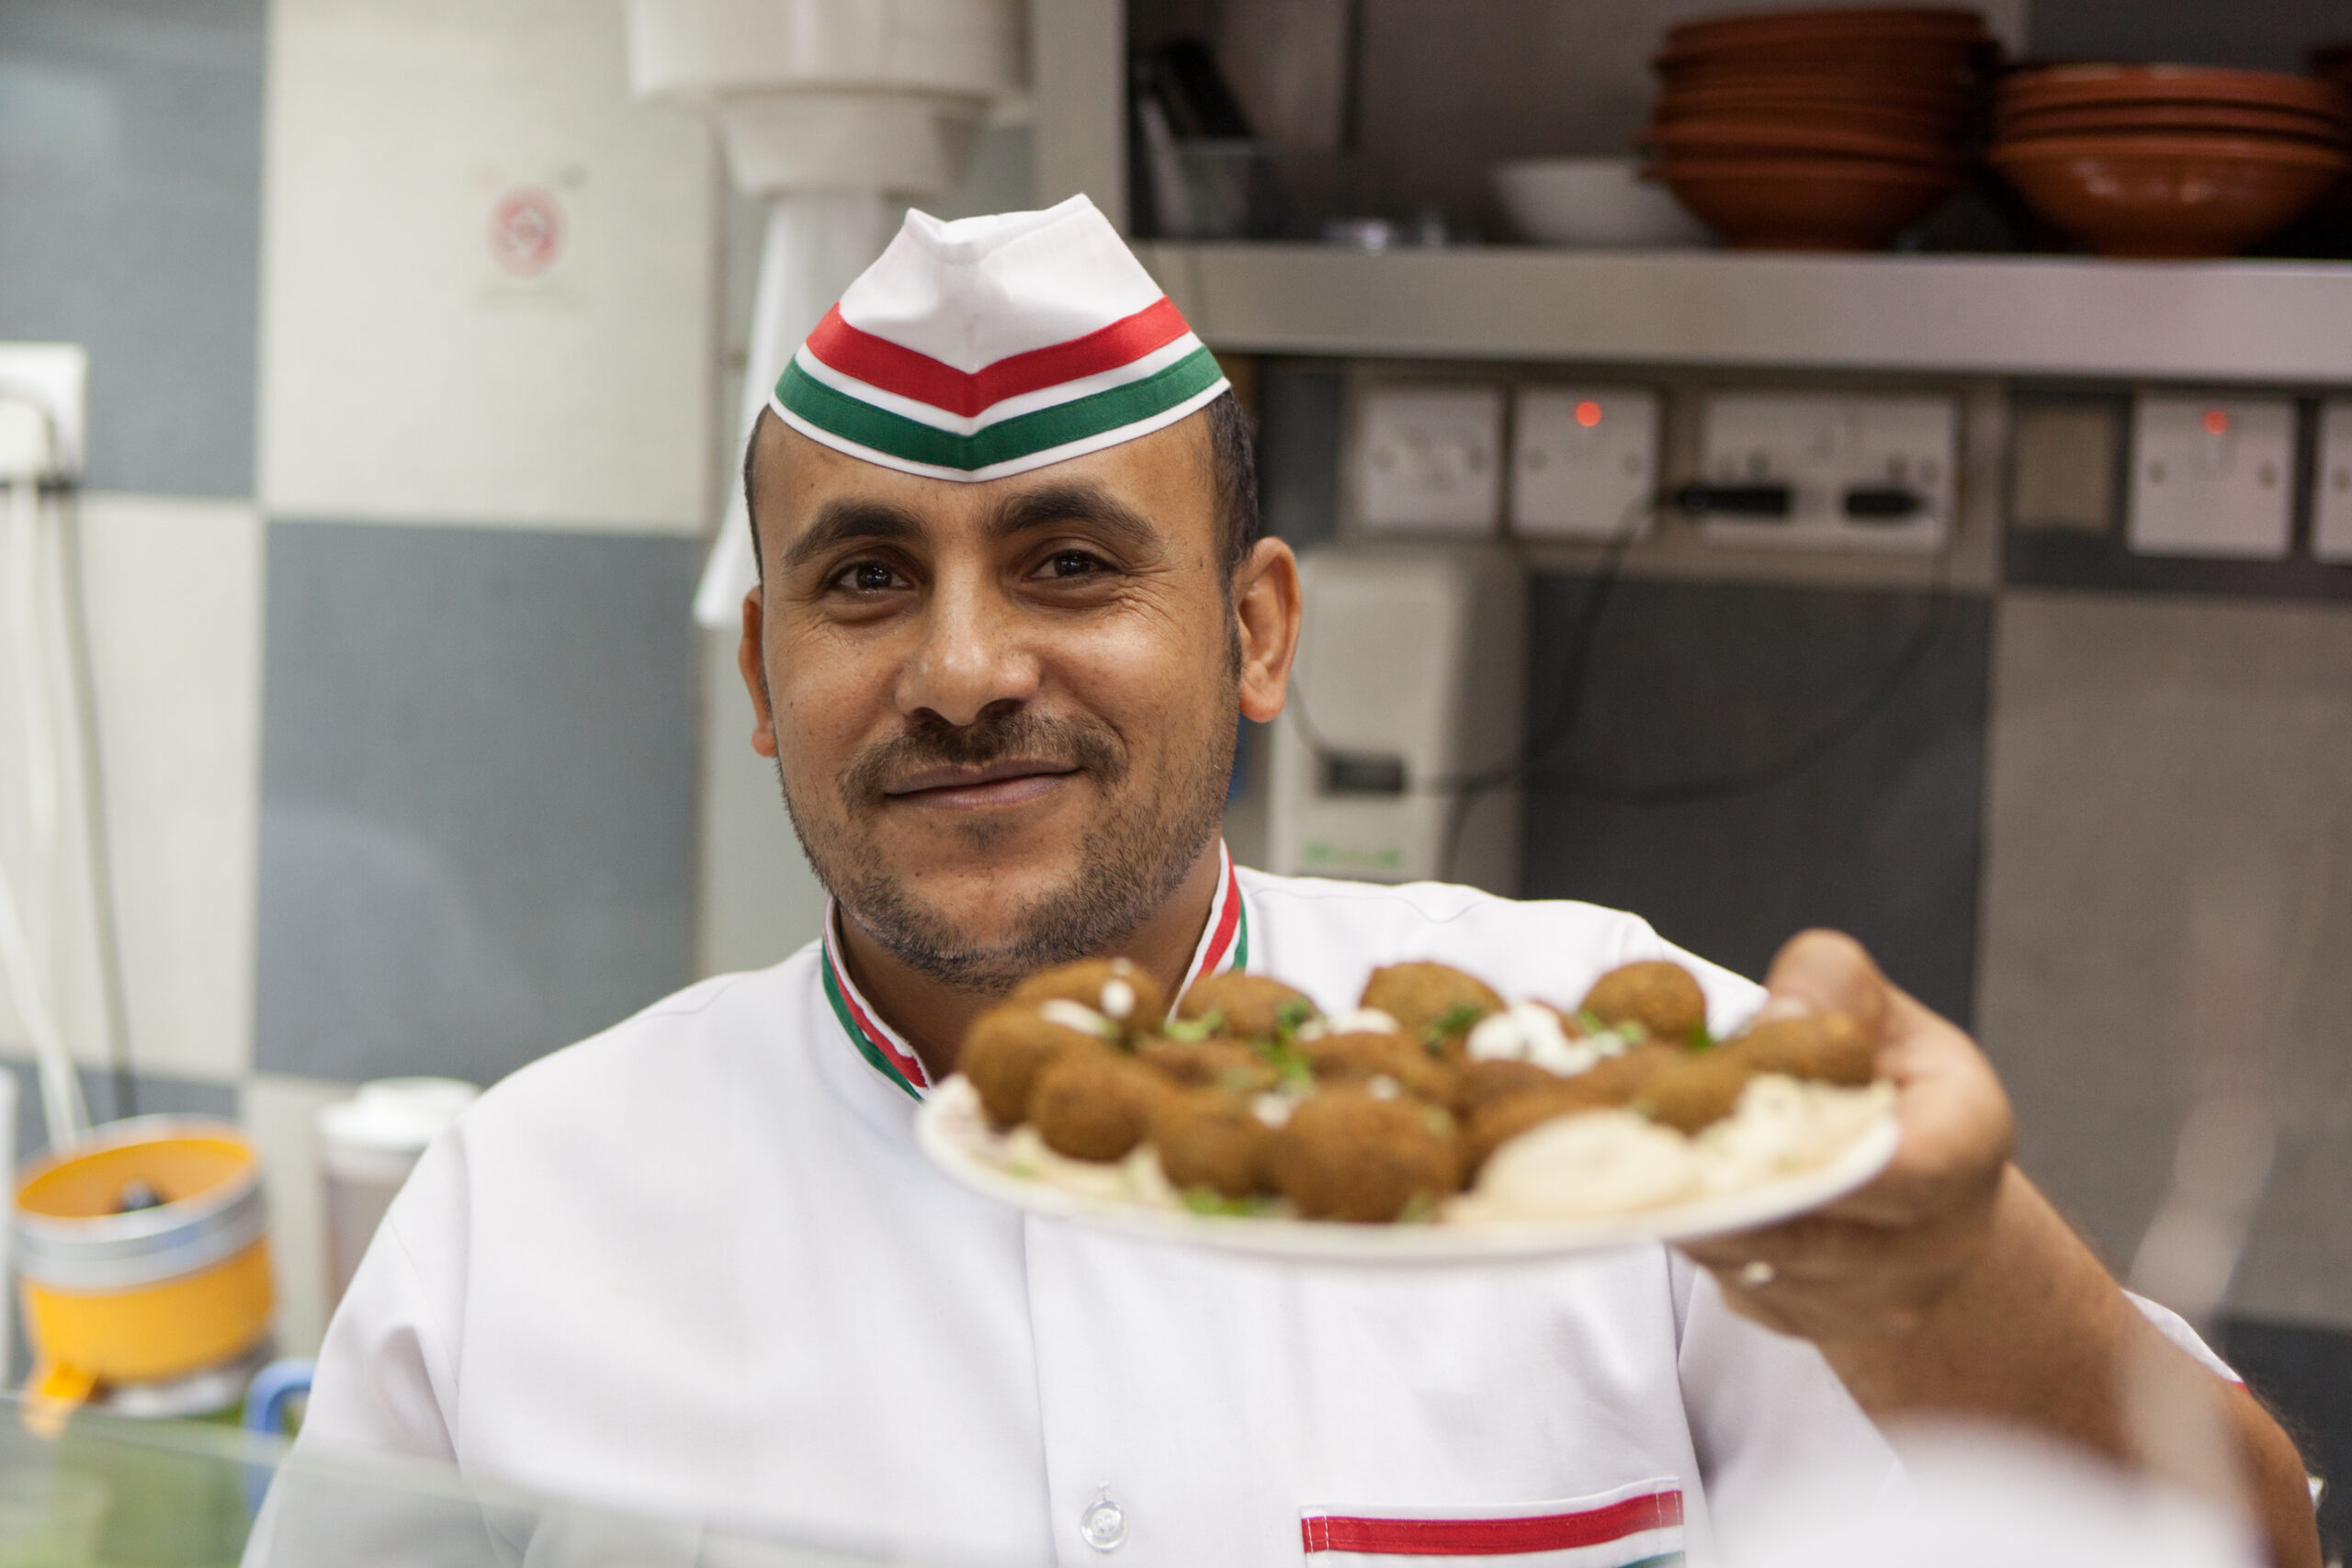 A photo of a food vendor looking into the camera with smile, holding out a plate of falafel.